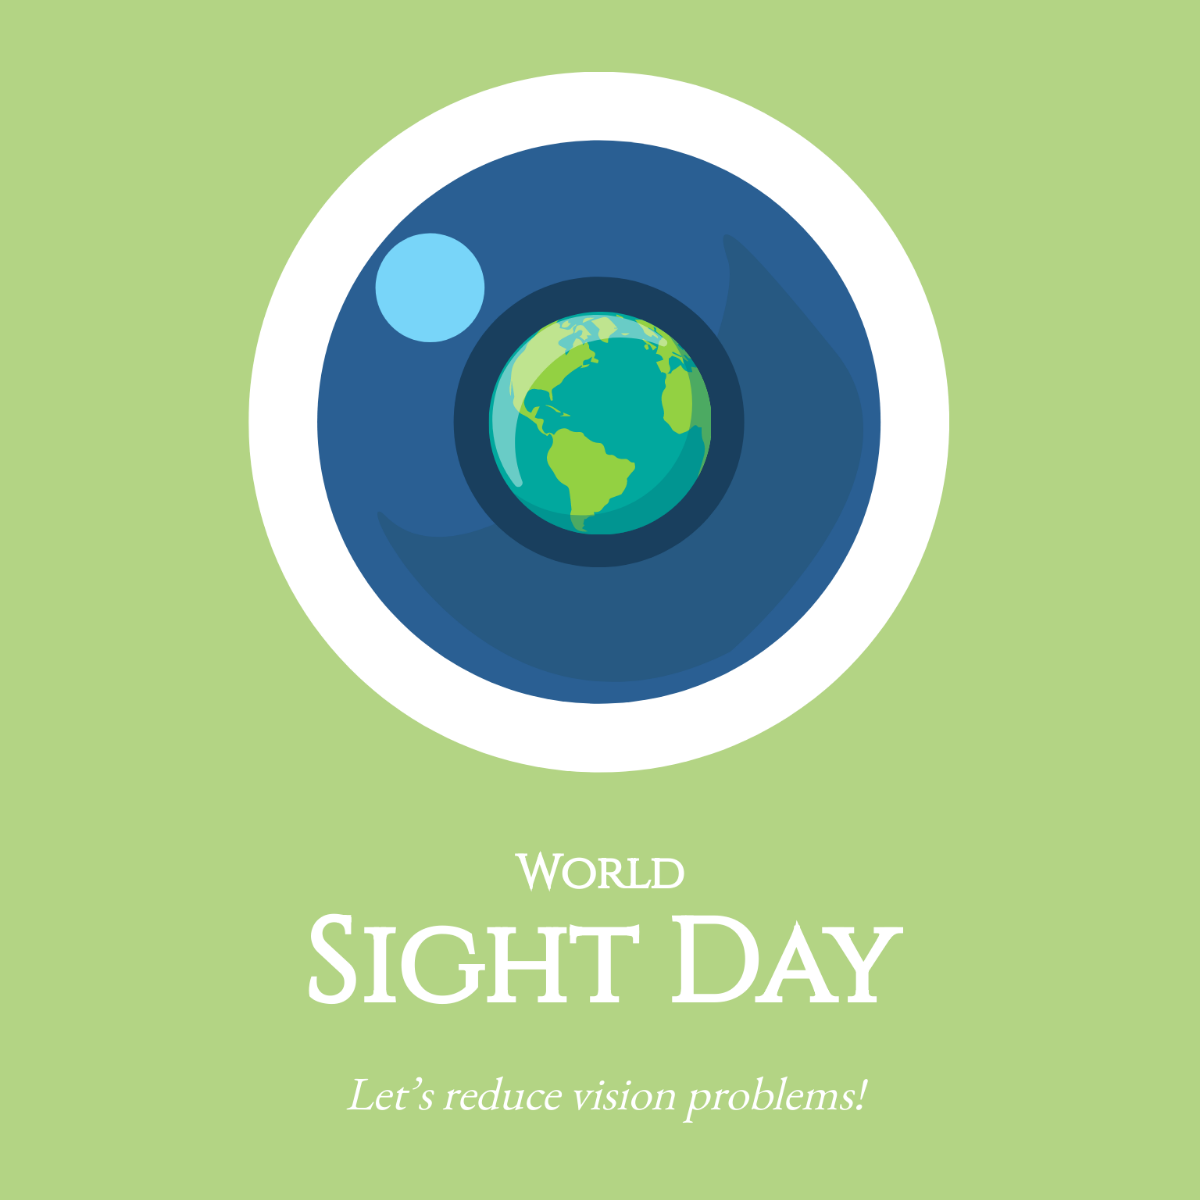 Free World Sight Day Poster Vector Template